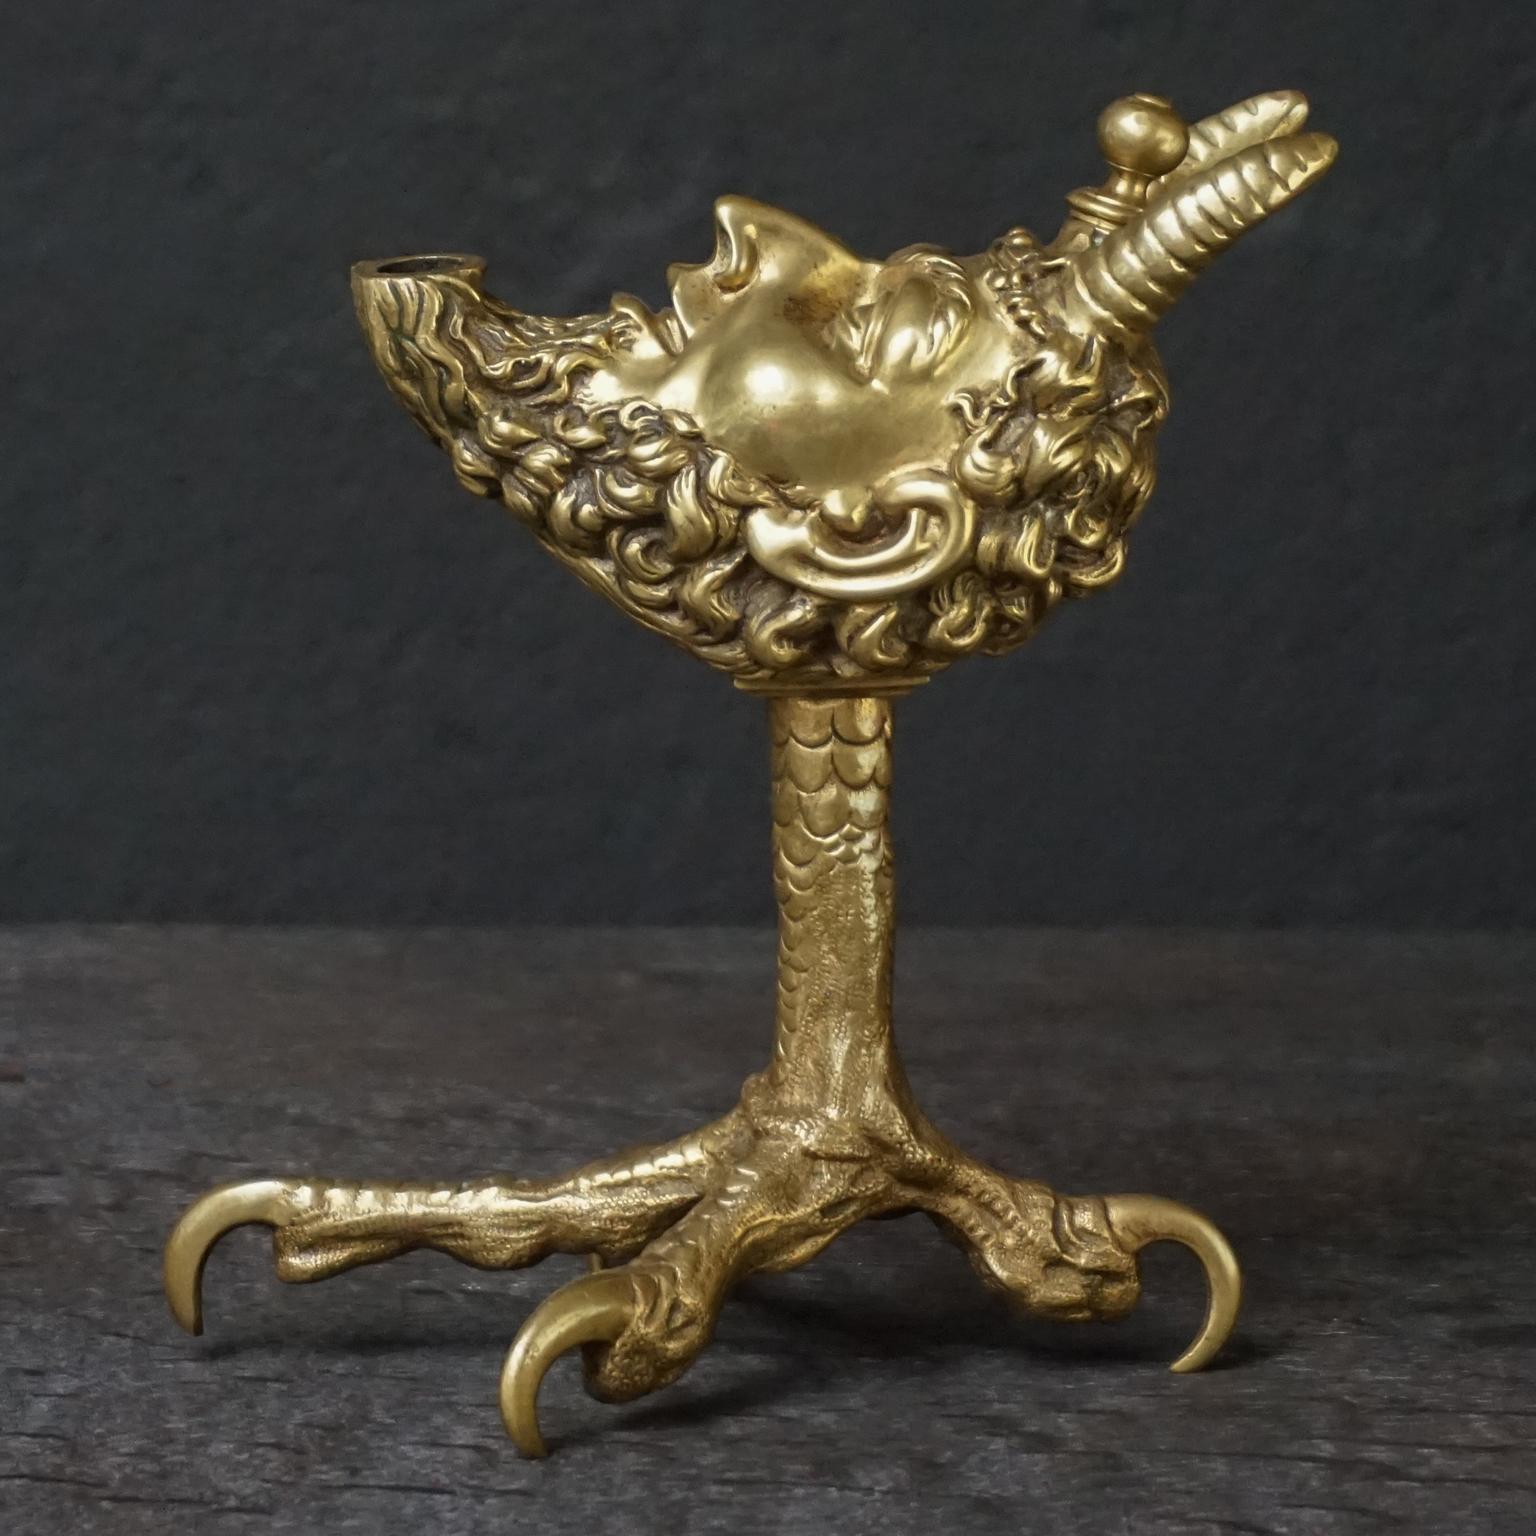 Very unusual 19th century brass table or counter top cigar lighter. 
Finely cast brass satyr or devil head on a rooster leg or talon with an oil reservoir, once filled it can be used to light your cigar from a burning wick from his mouth. 
Rare